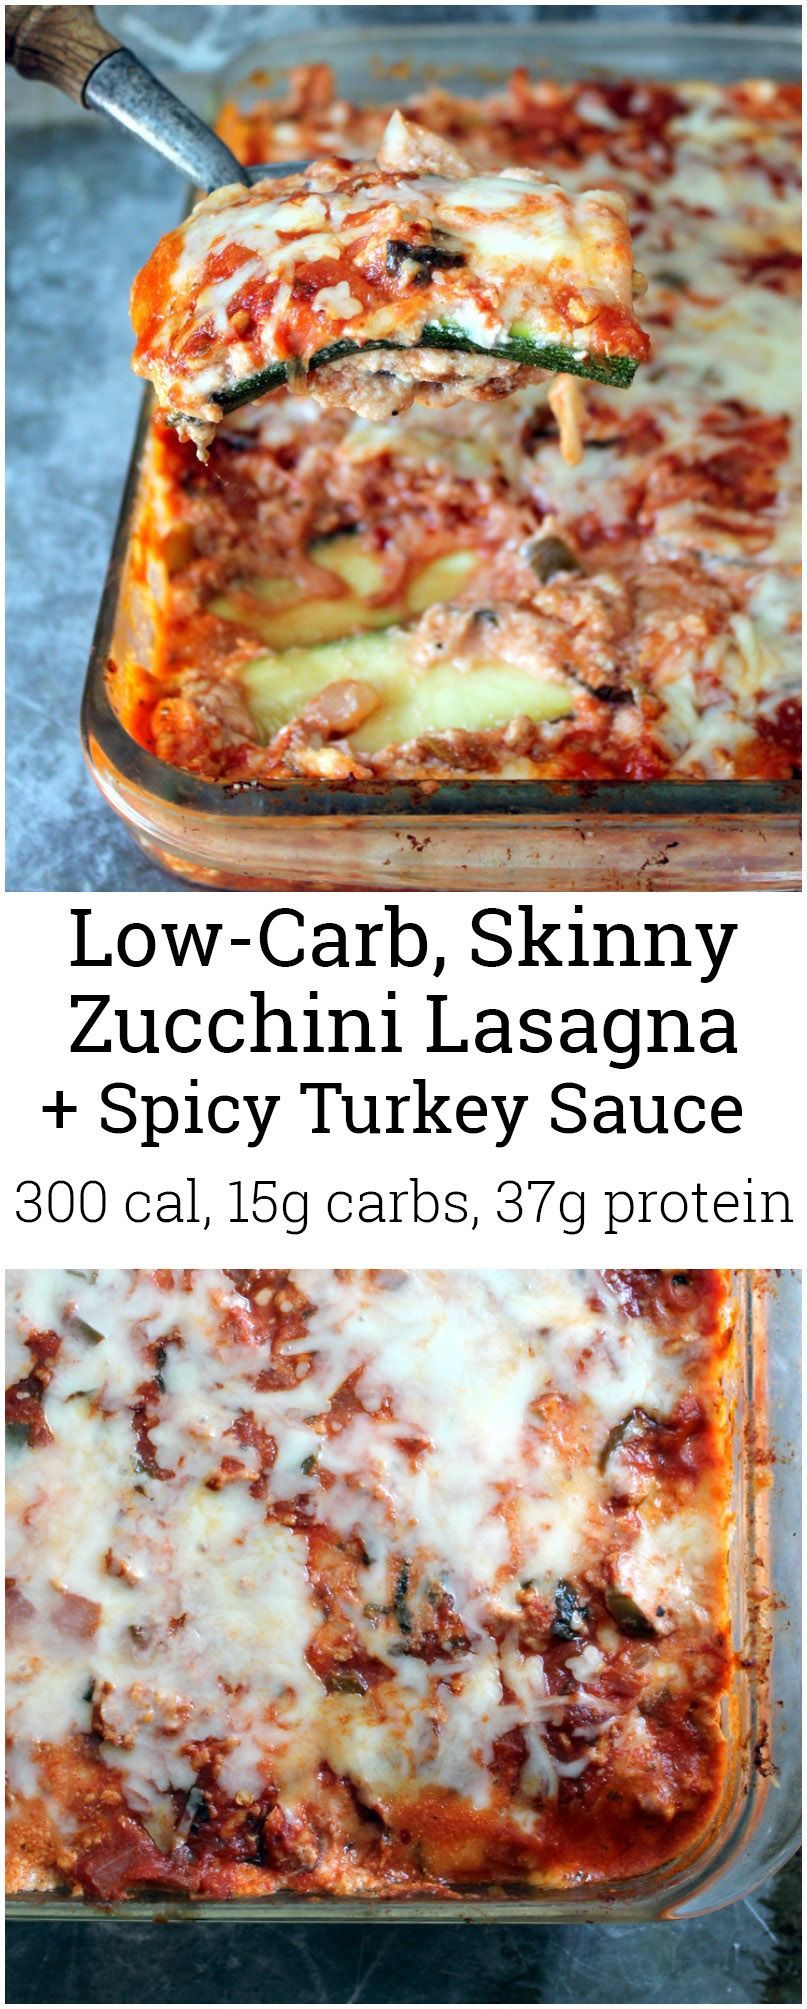 A noodle-less, low carb zucchini lasagna with an incredible turkey meat sauce!